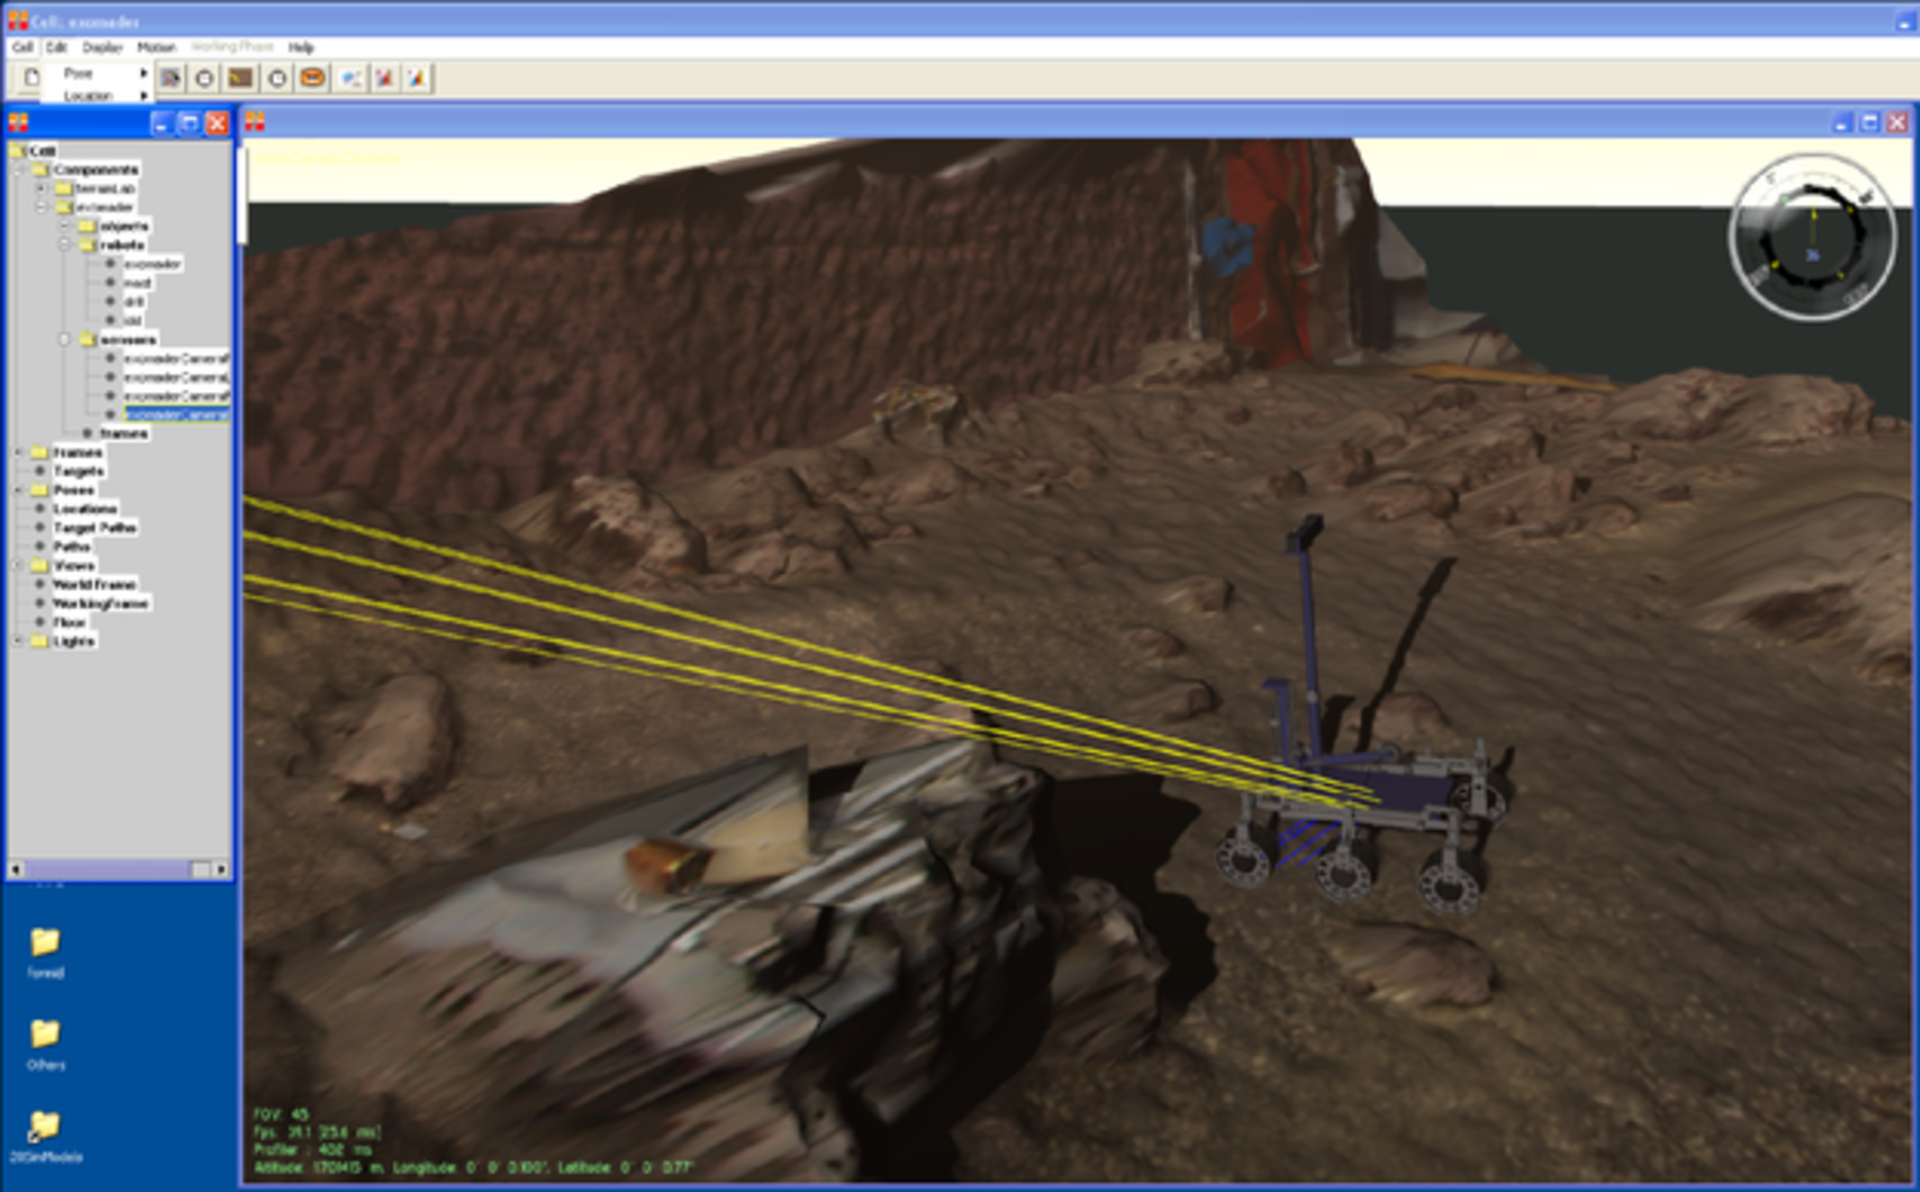 Rover in software test